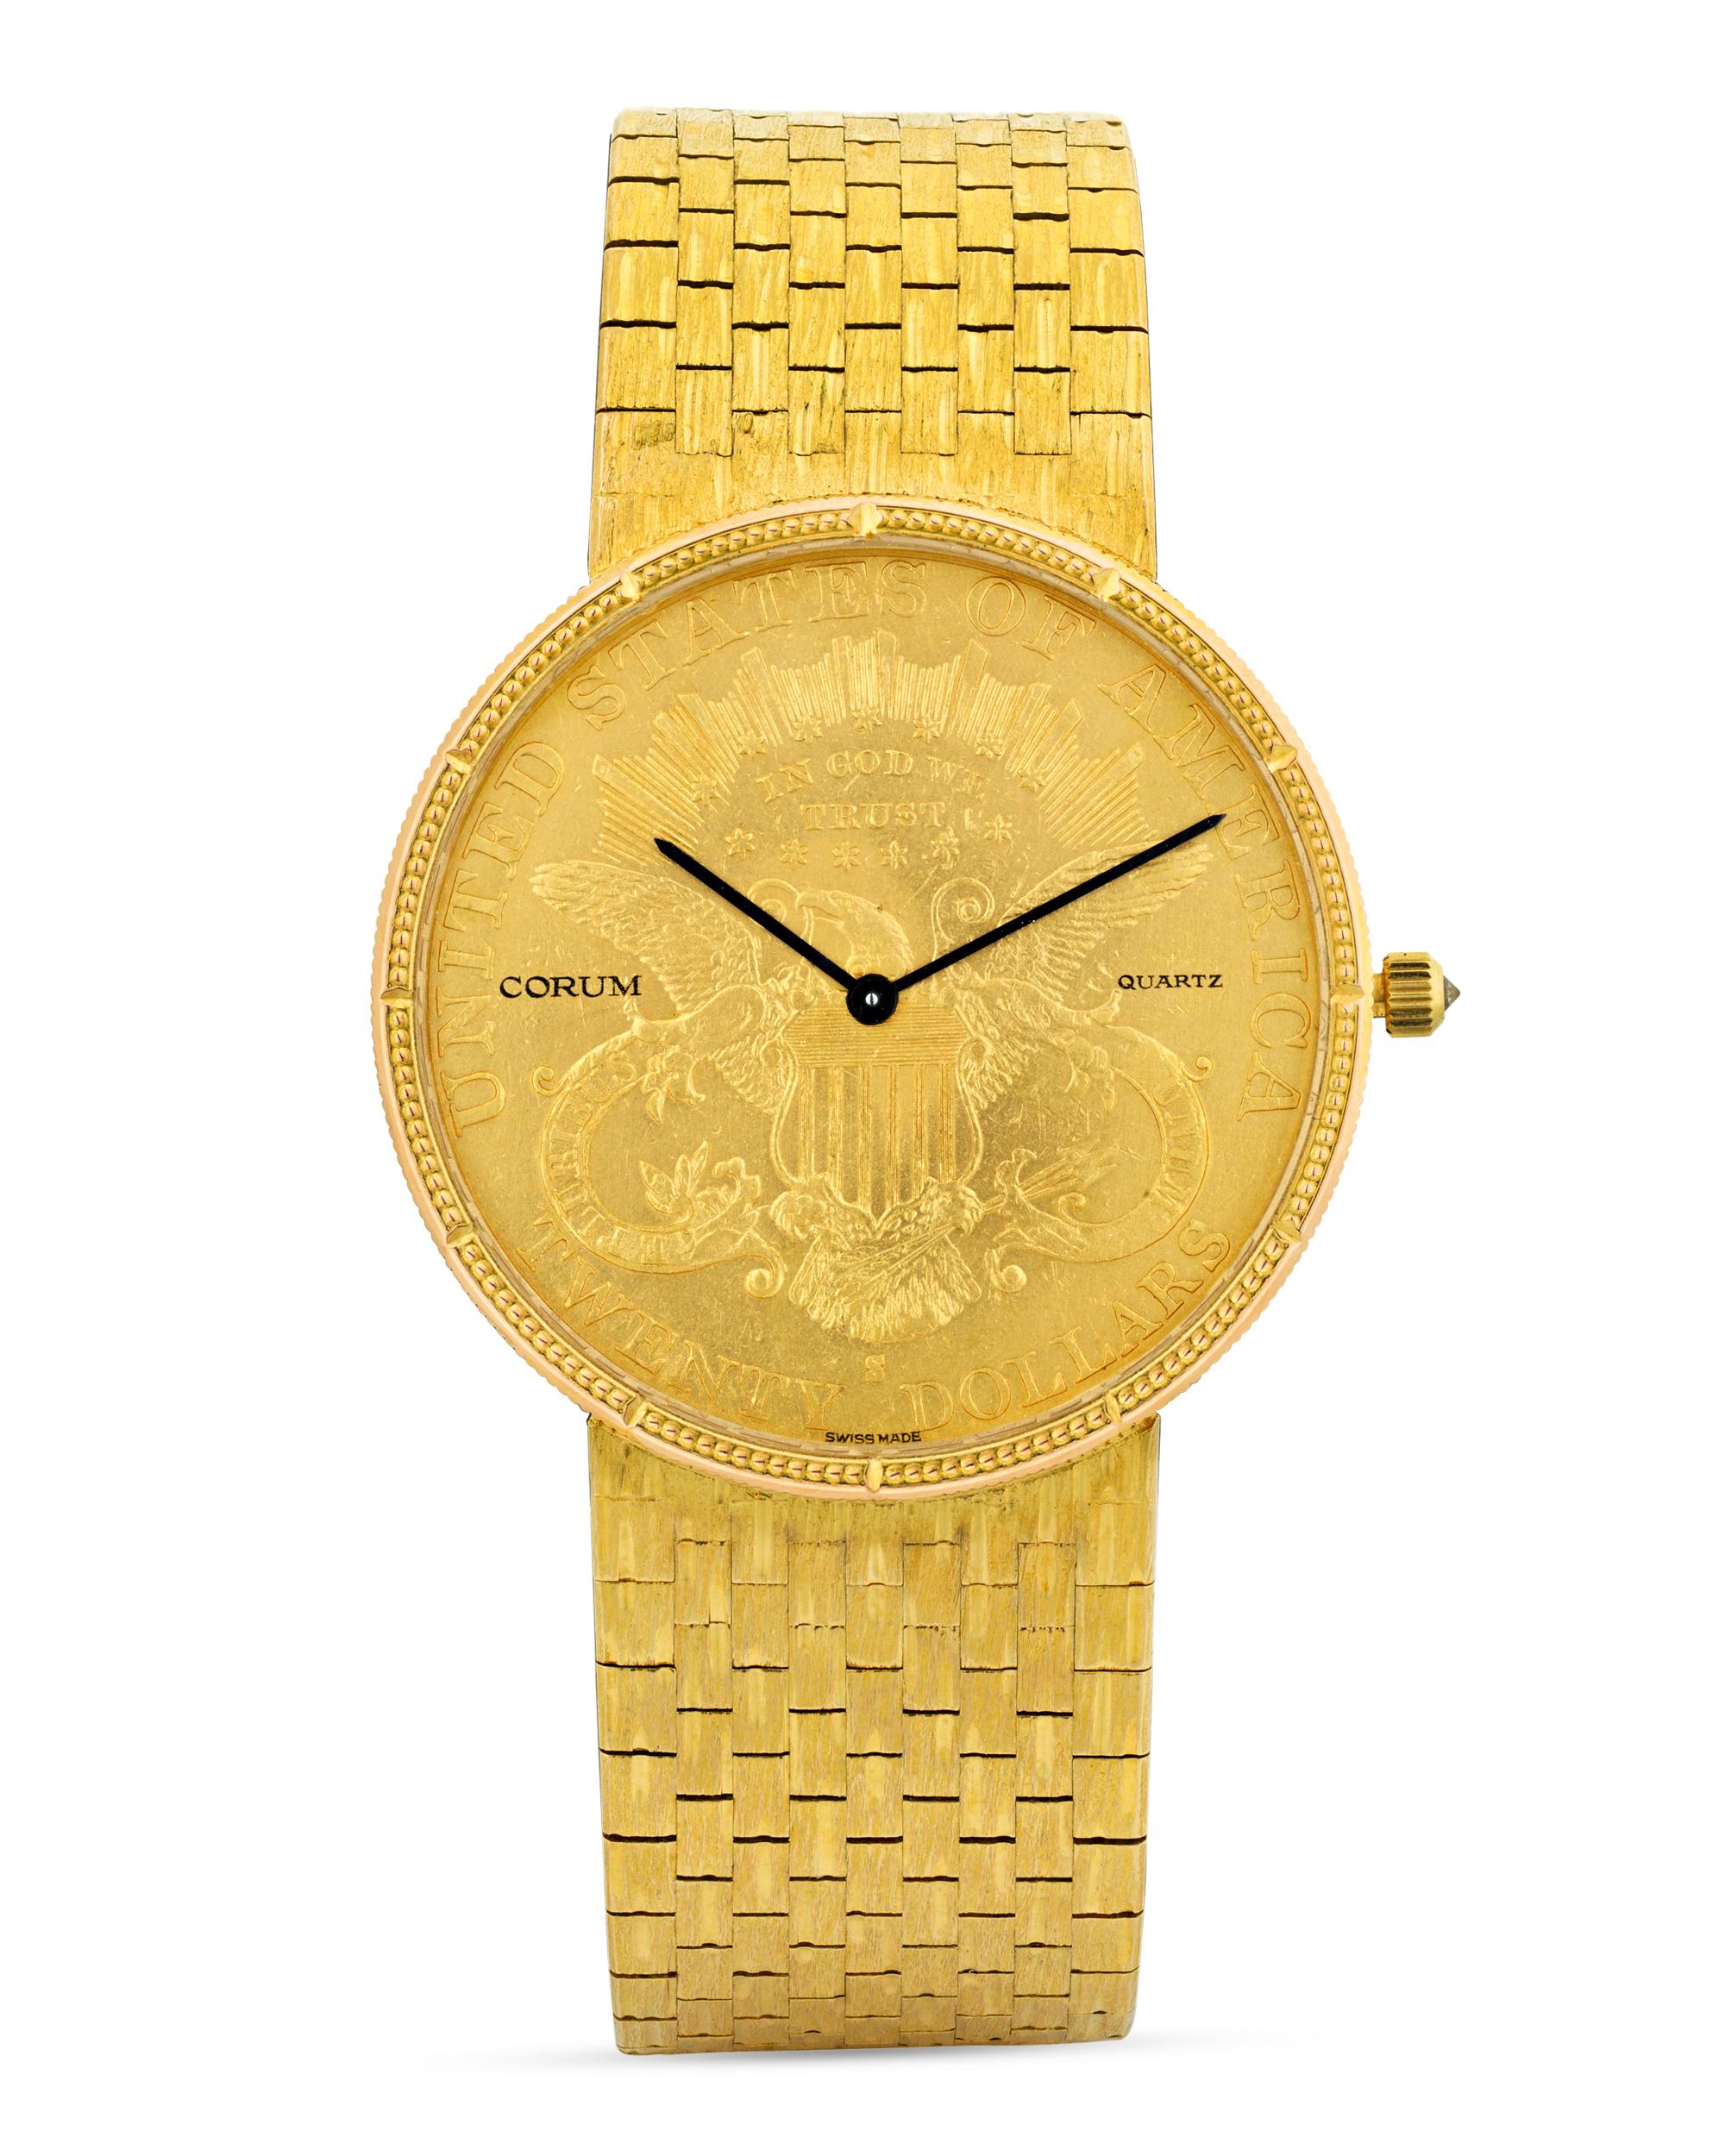 Regal and sophisticated, this gold coin watch by the renowned Swiss watchmaking firm of Corum incorporates a stately 1888 American 20-dollar 